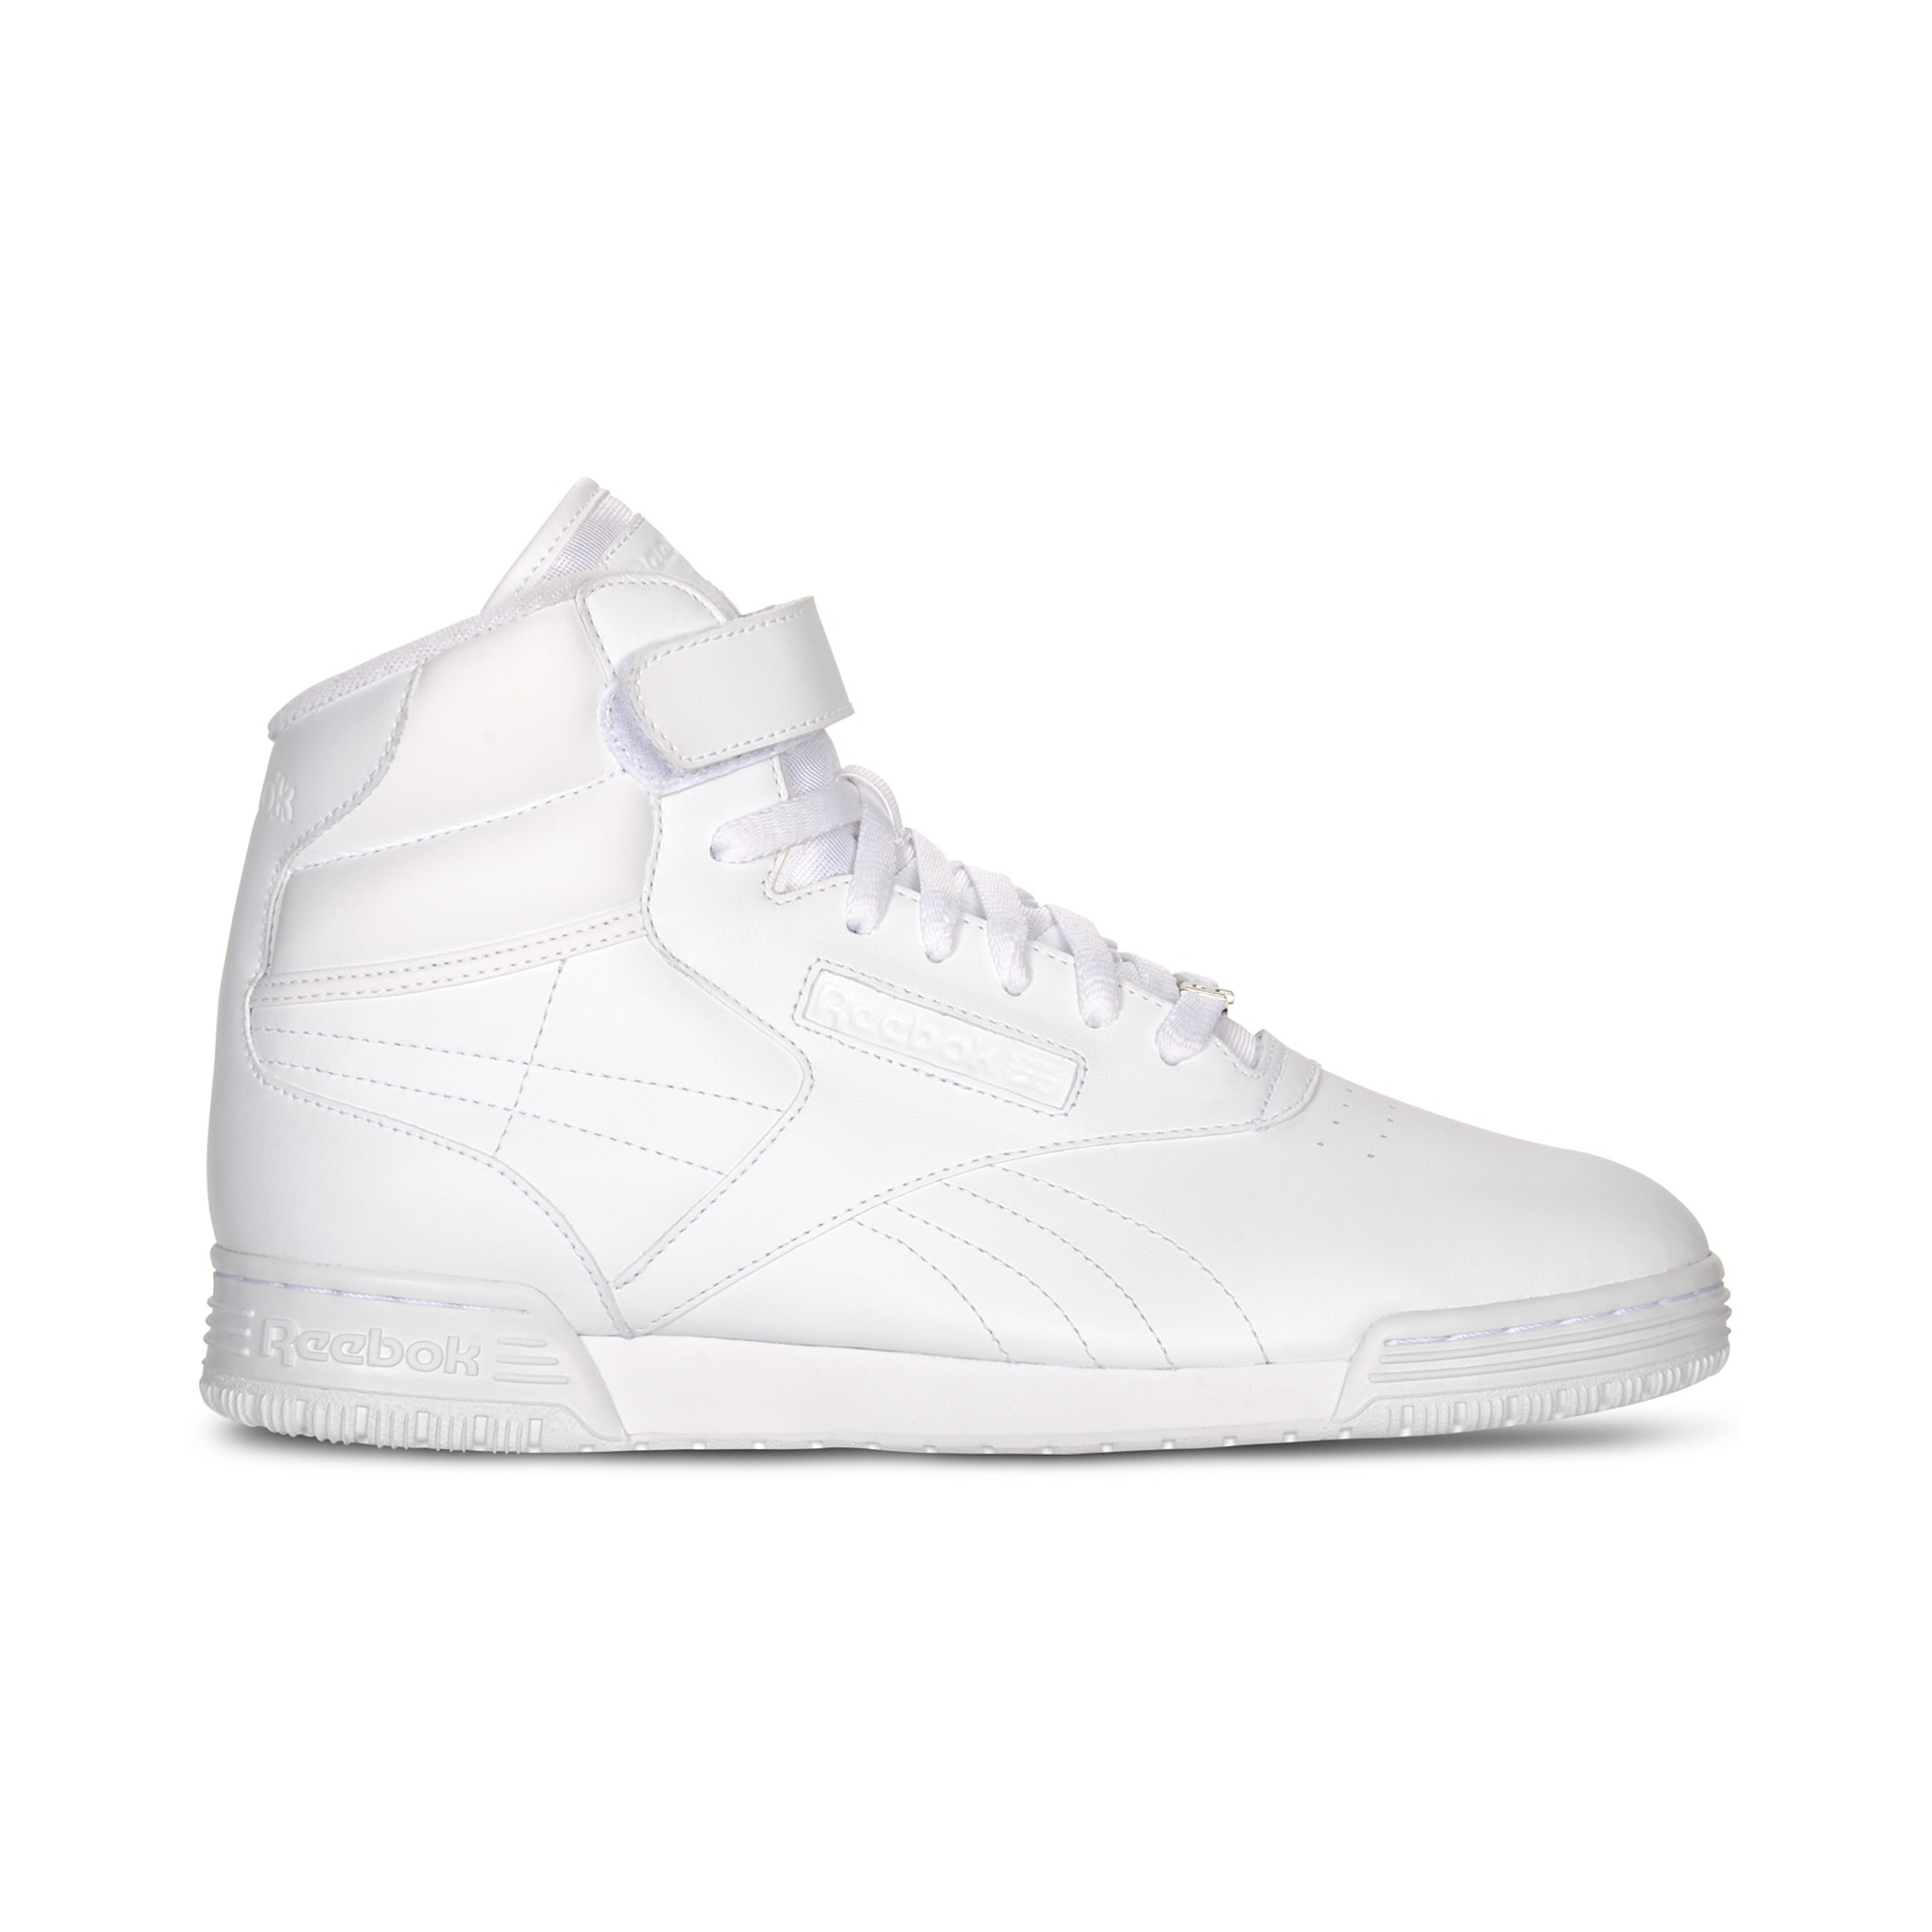 Reebok Exofit Mid Casual Sneakers in White/White (White) for Men - Lyst